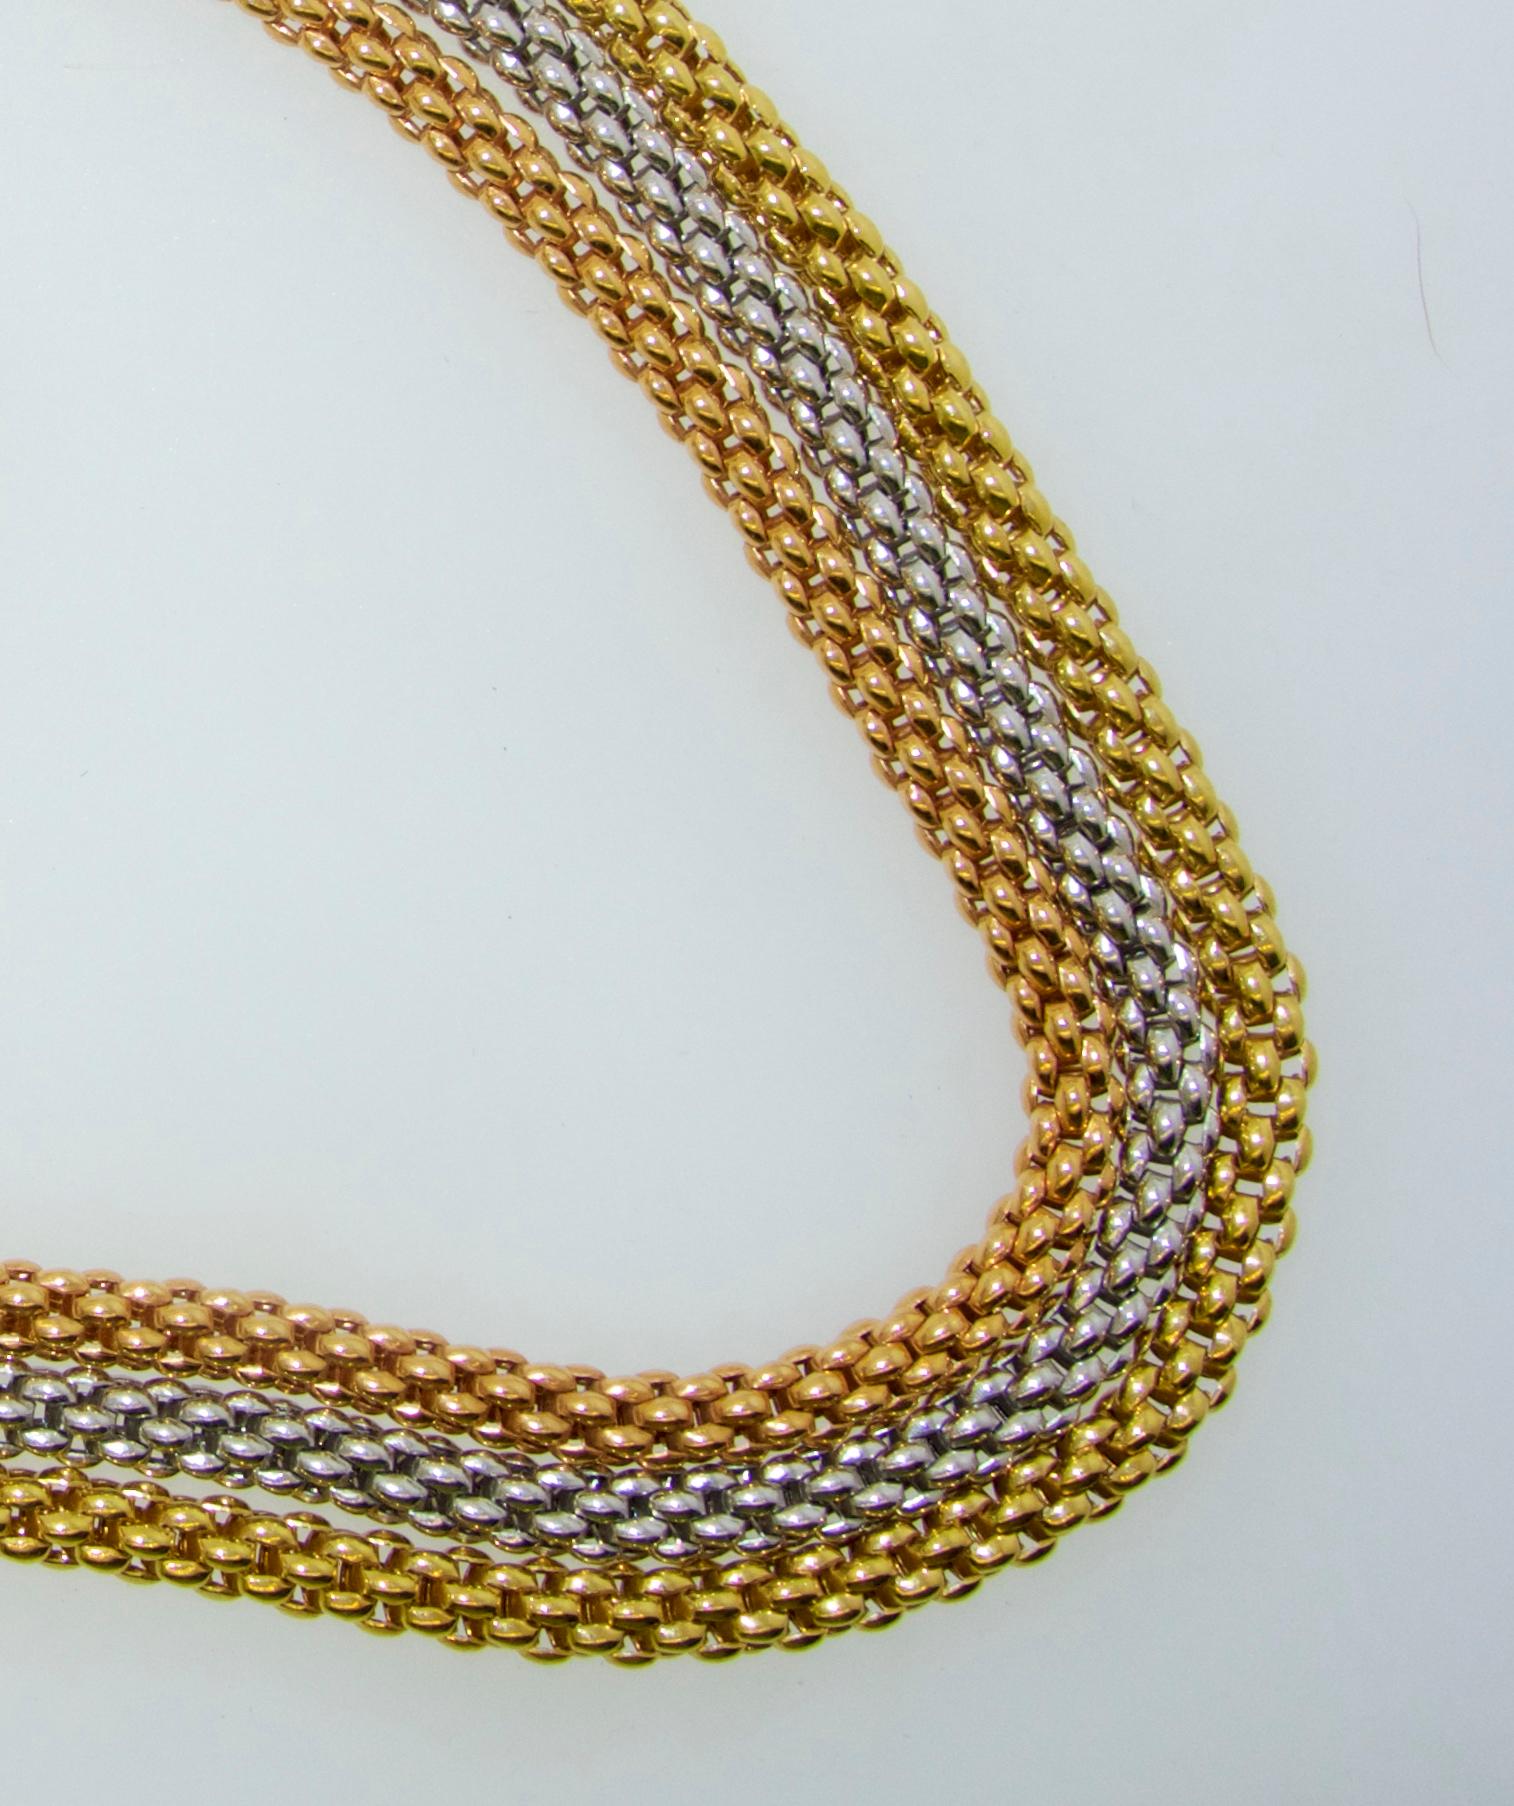 Contemporary 18 Karat Handwoven Gold Necklace by Fope